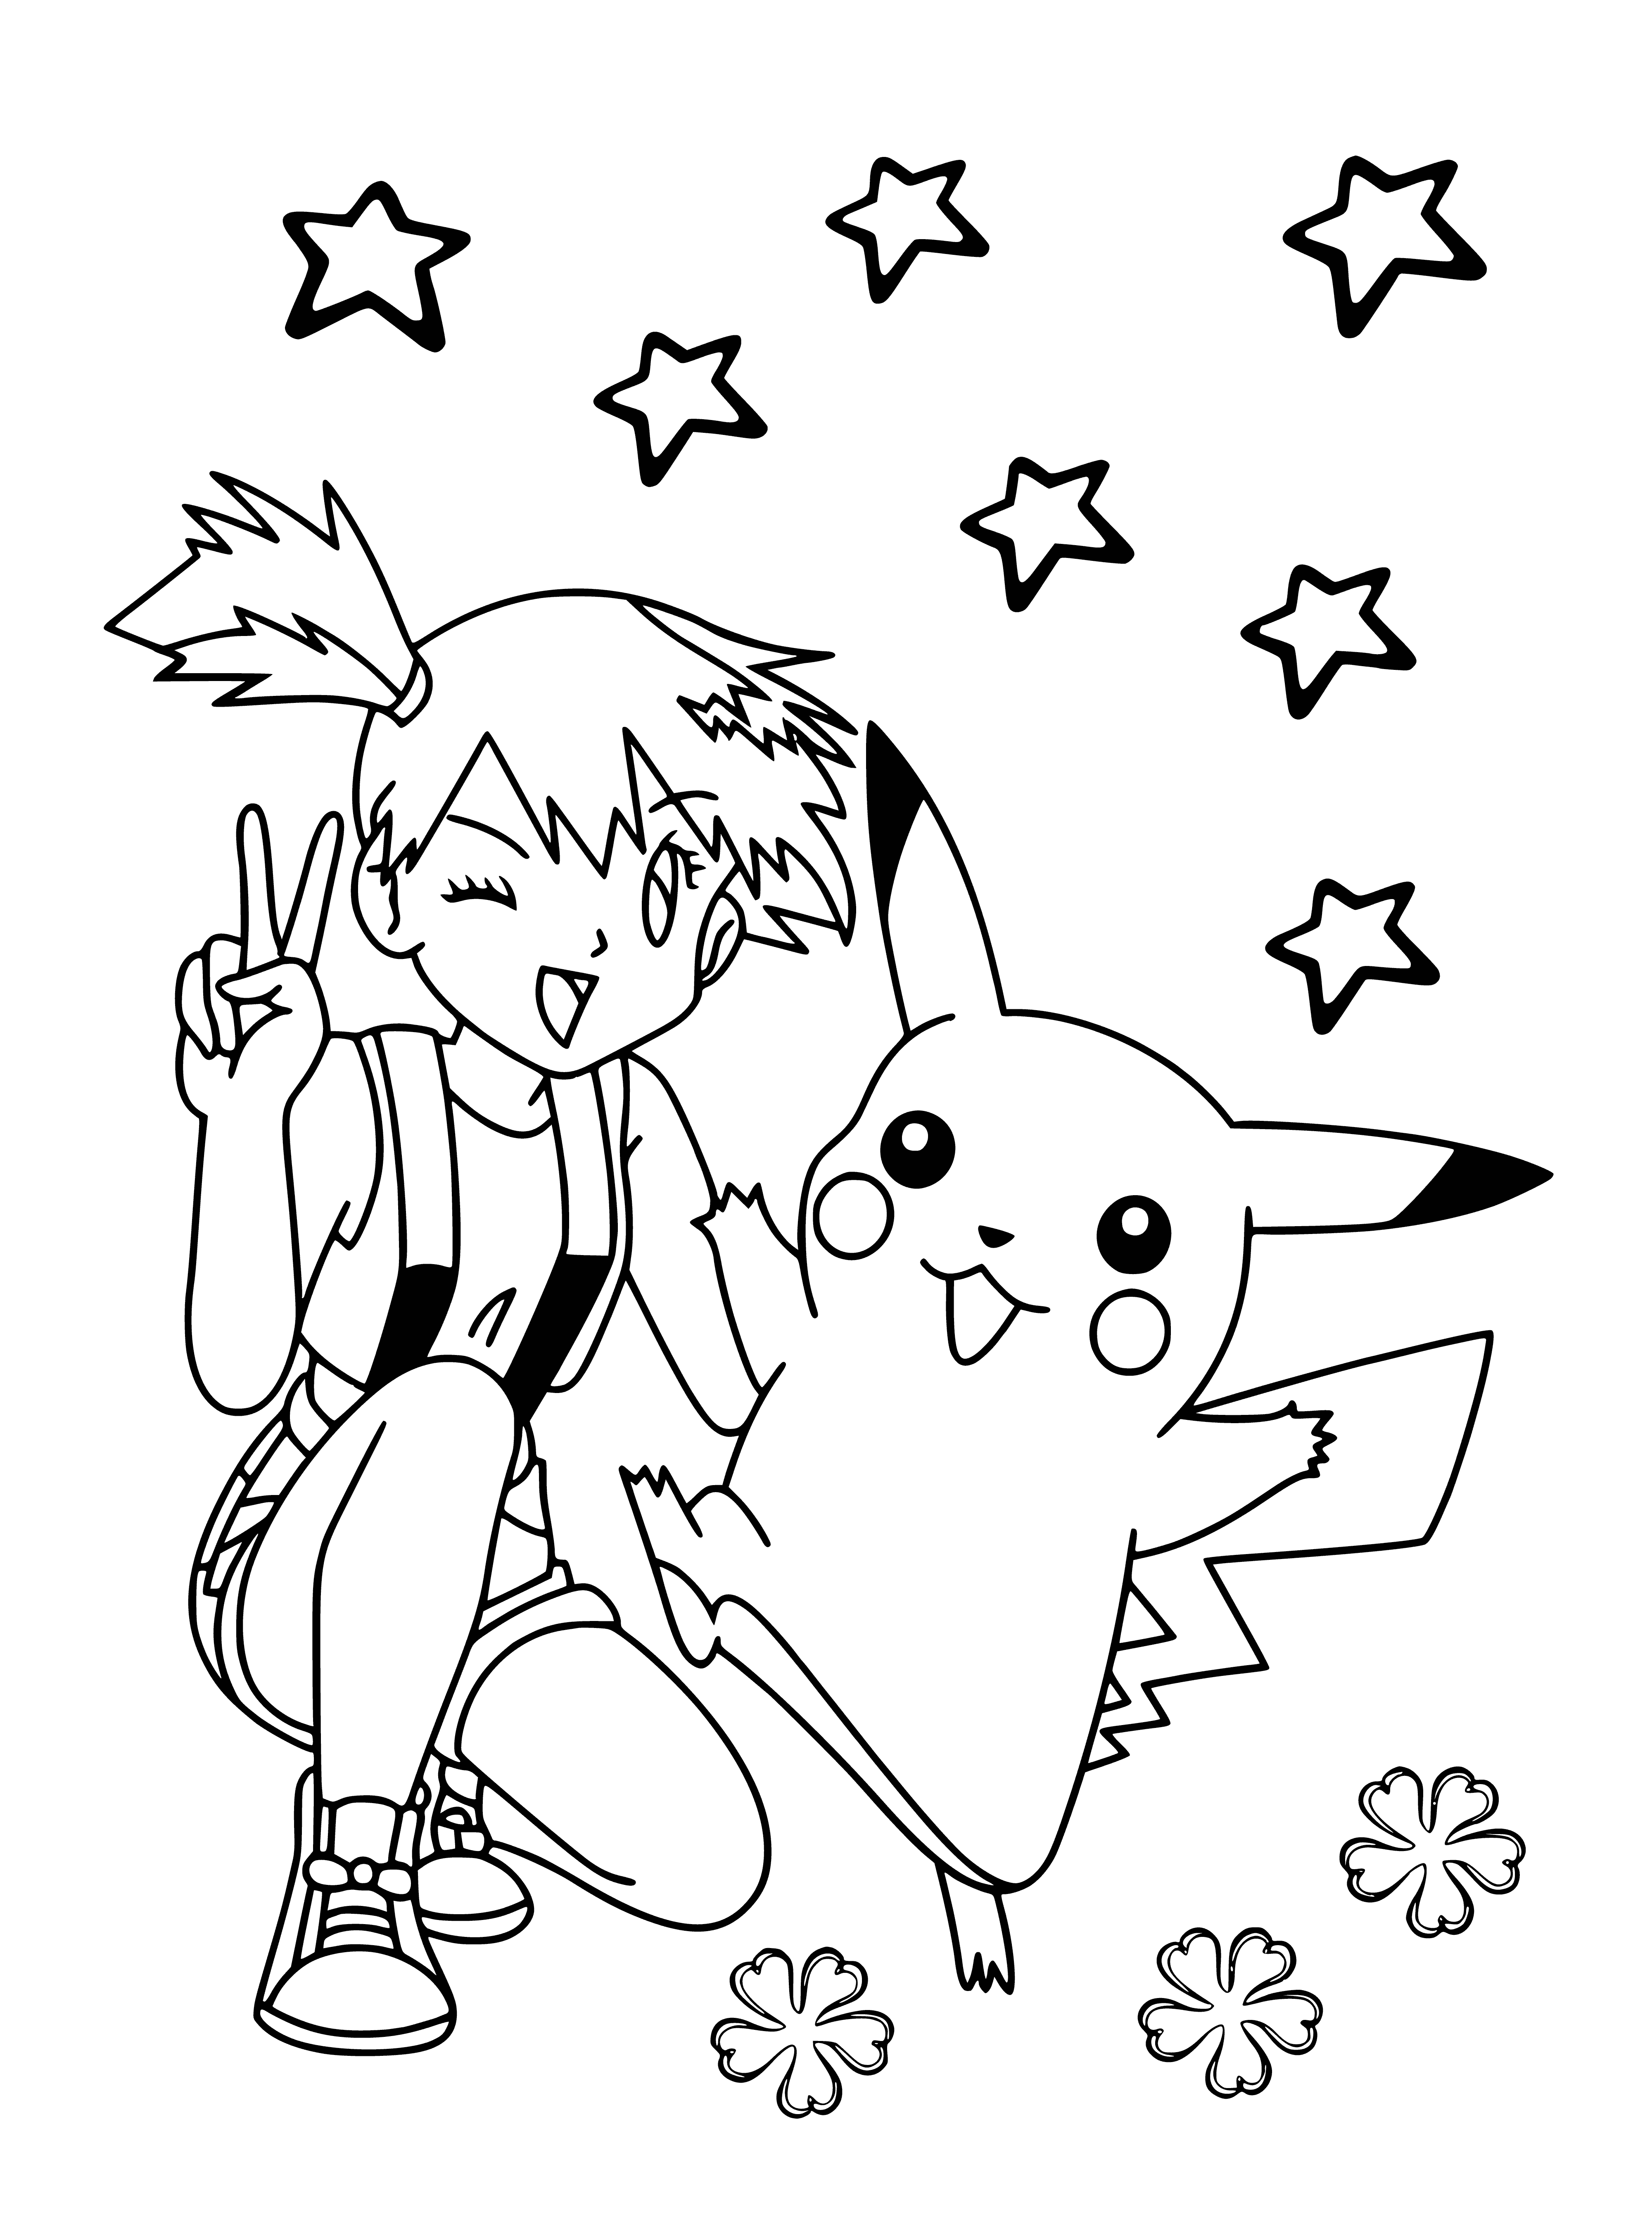 Misty and Pikachu coloring page